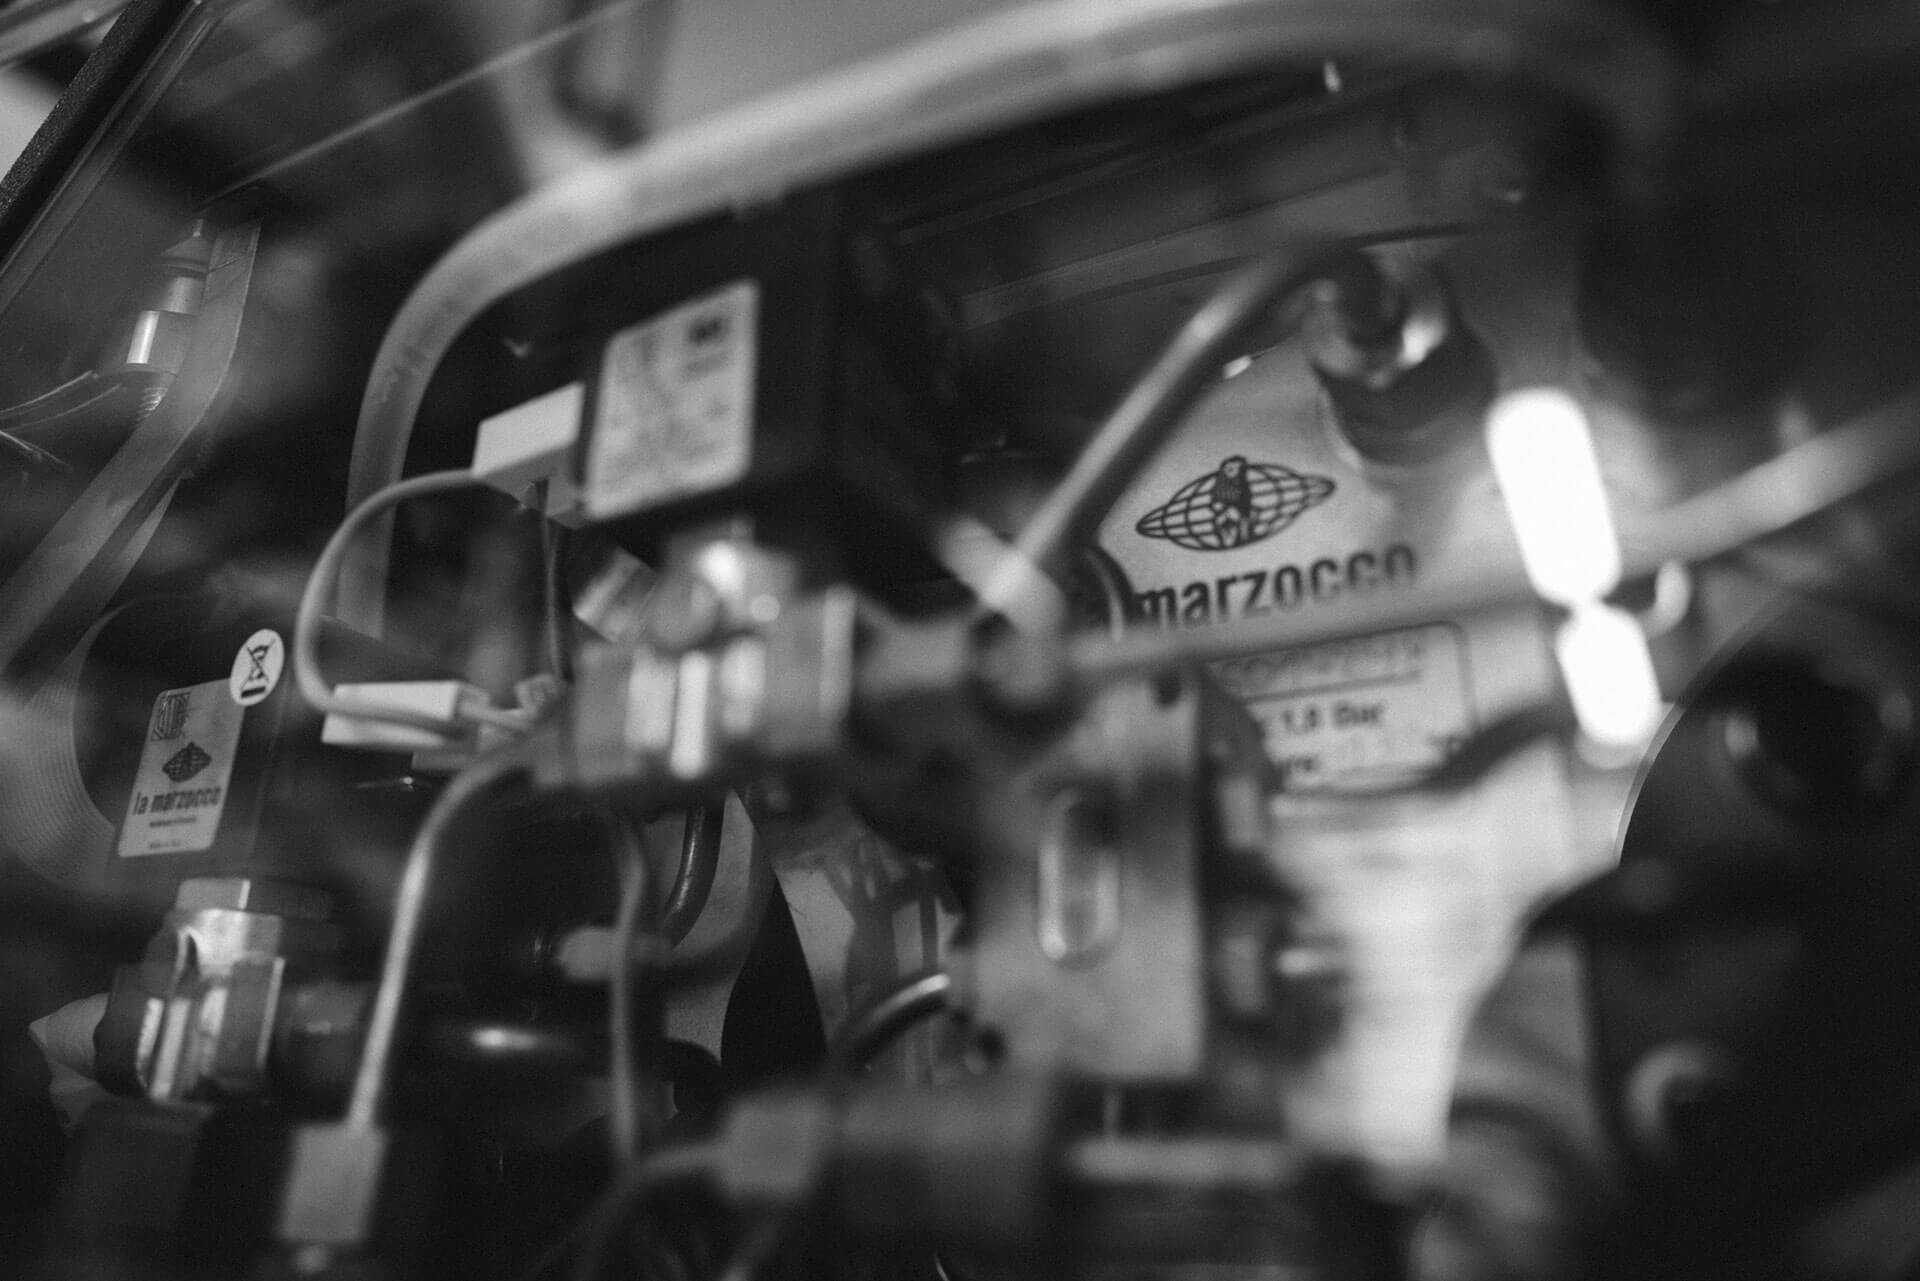 Inside an espresso machine. Solenoid valves, pipes, and the La Marzocco logo in the back